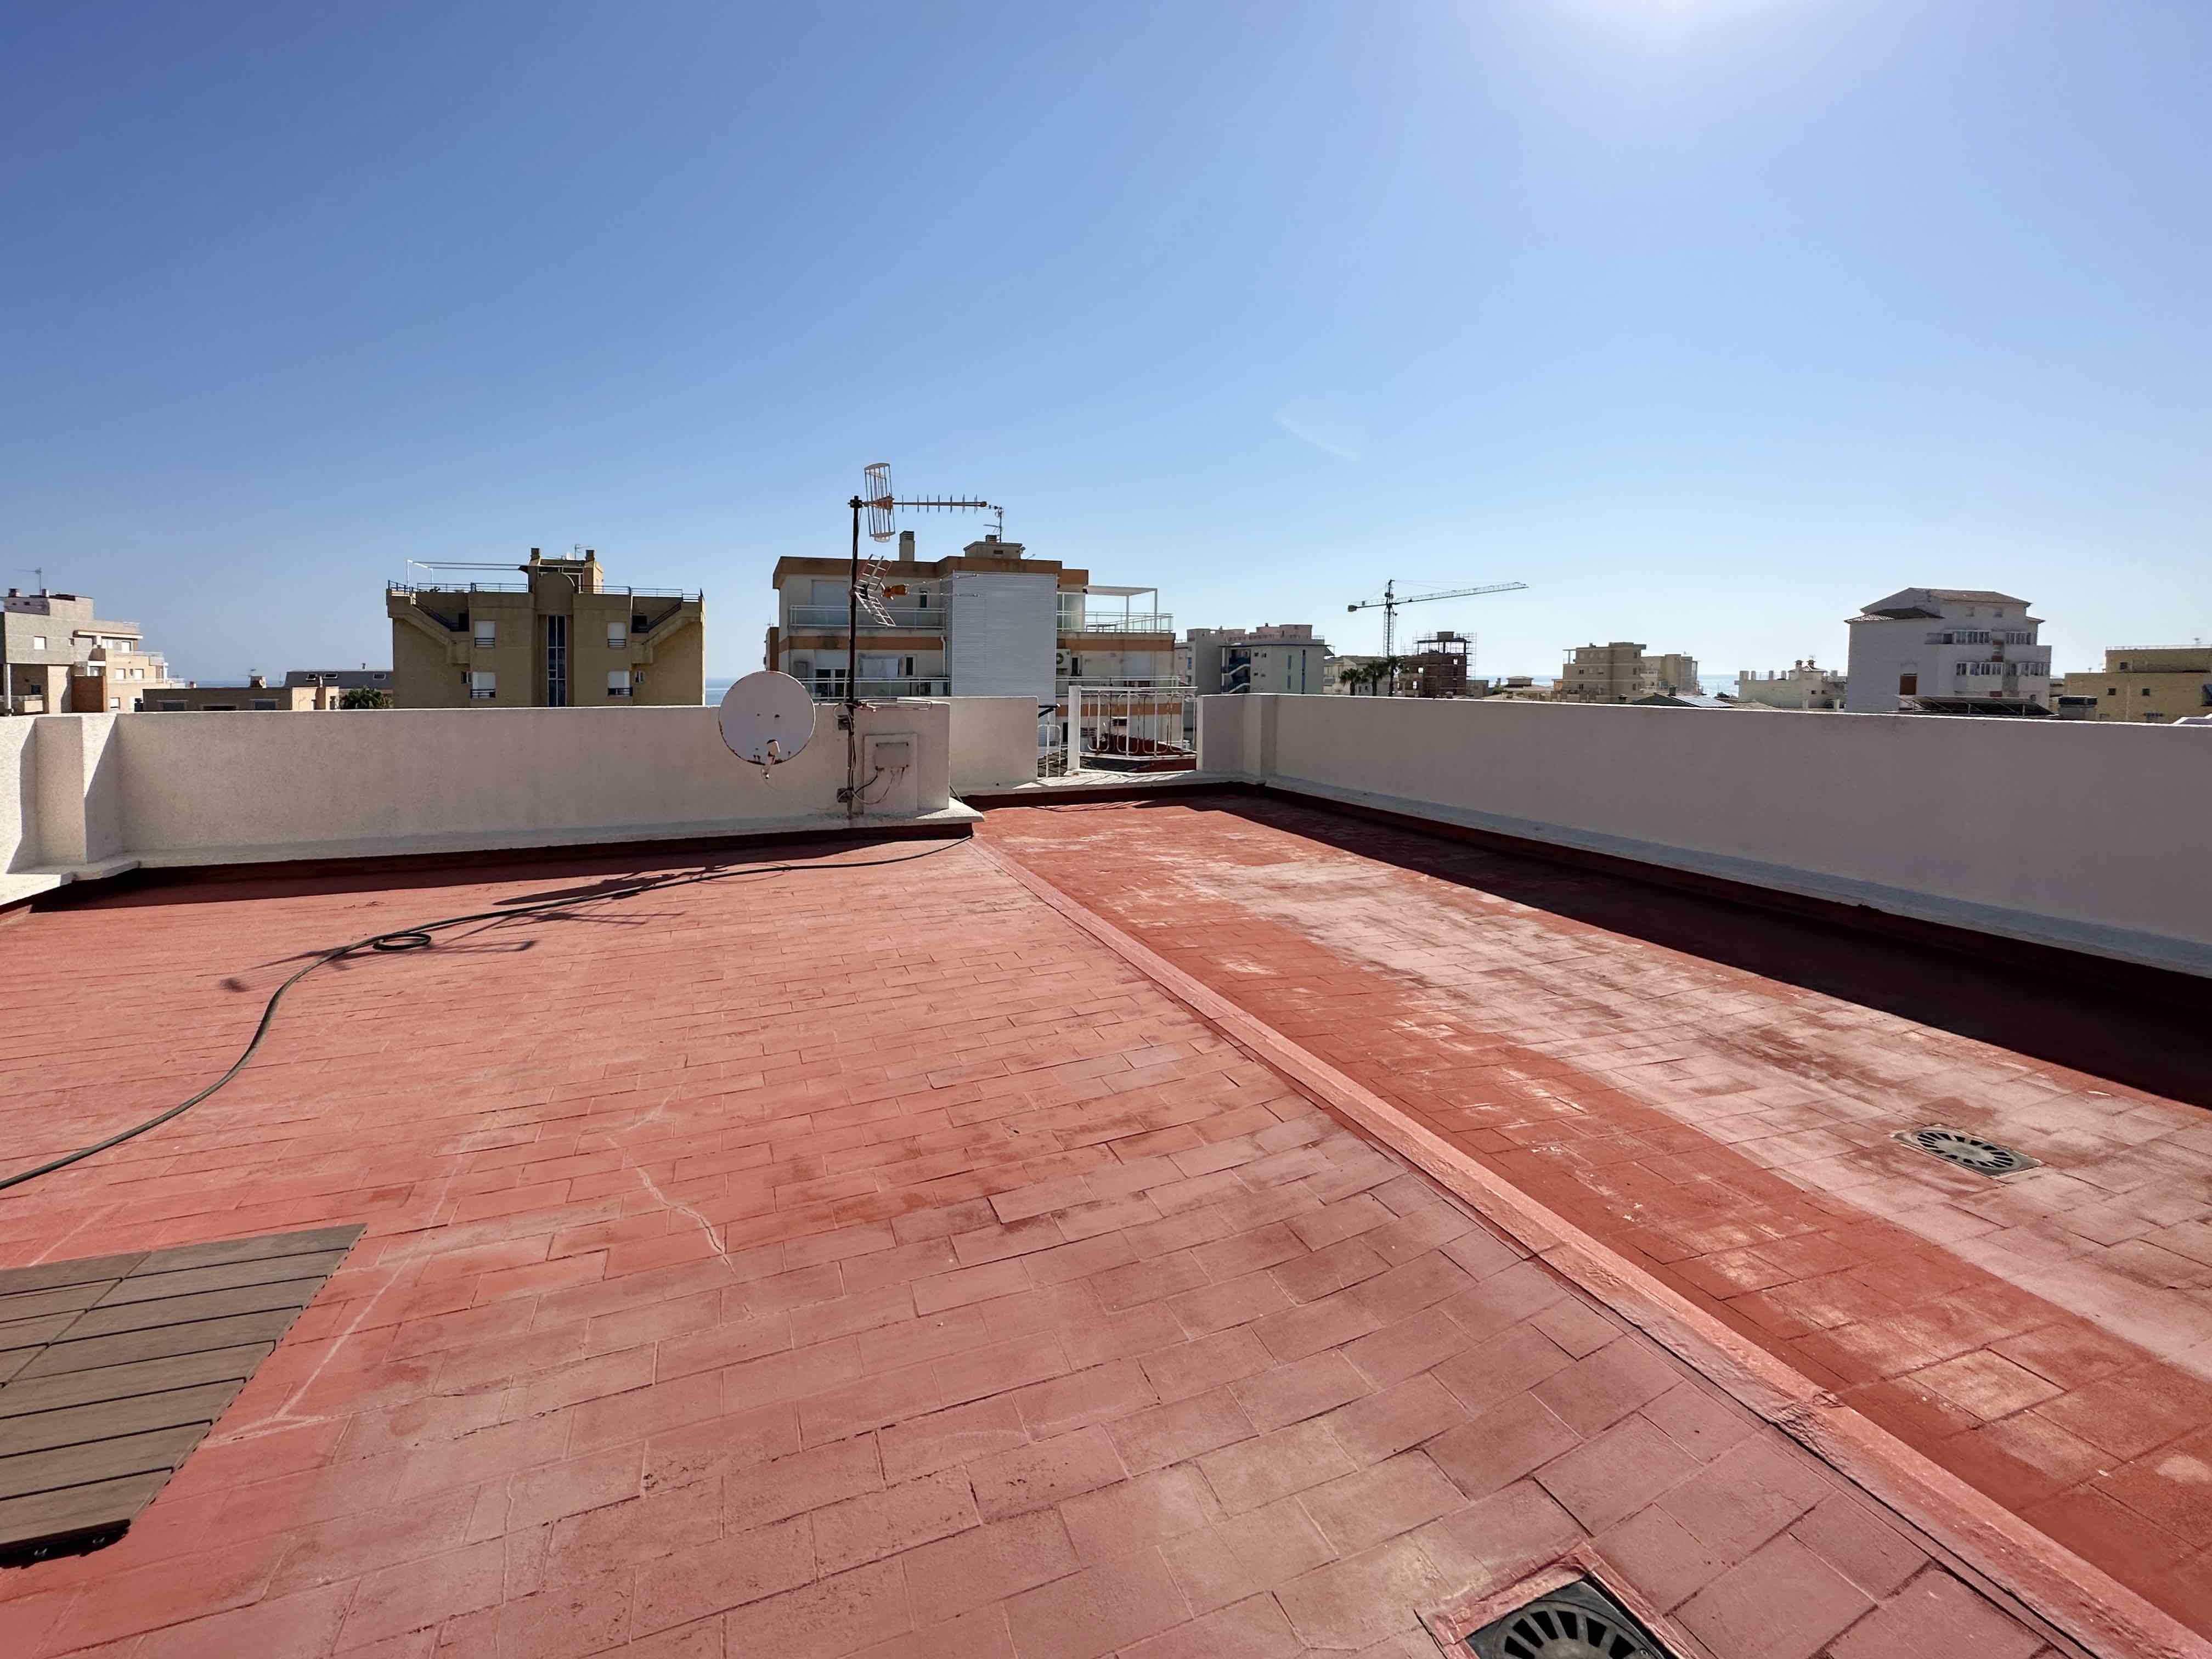 Beautiful penthouse with large terrace 200m from the beach of Oliva